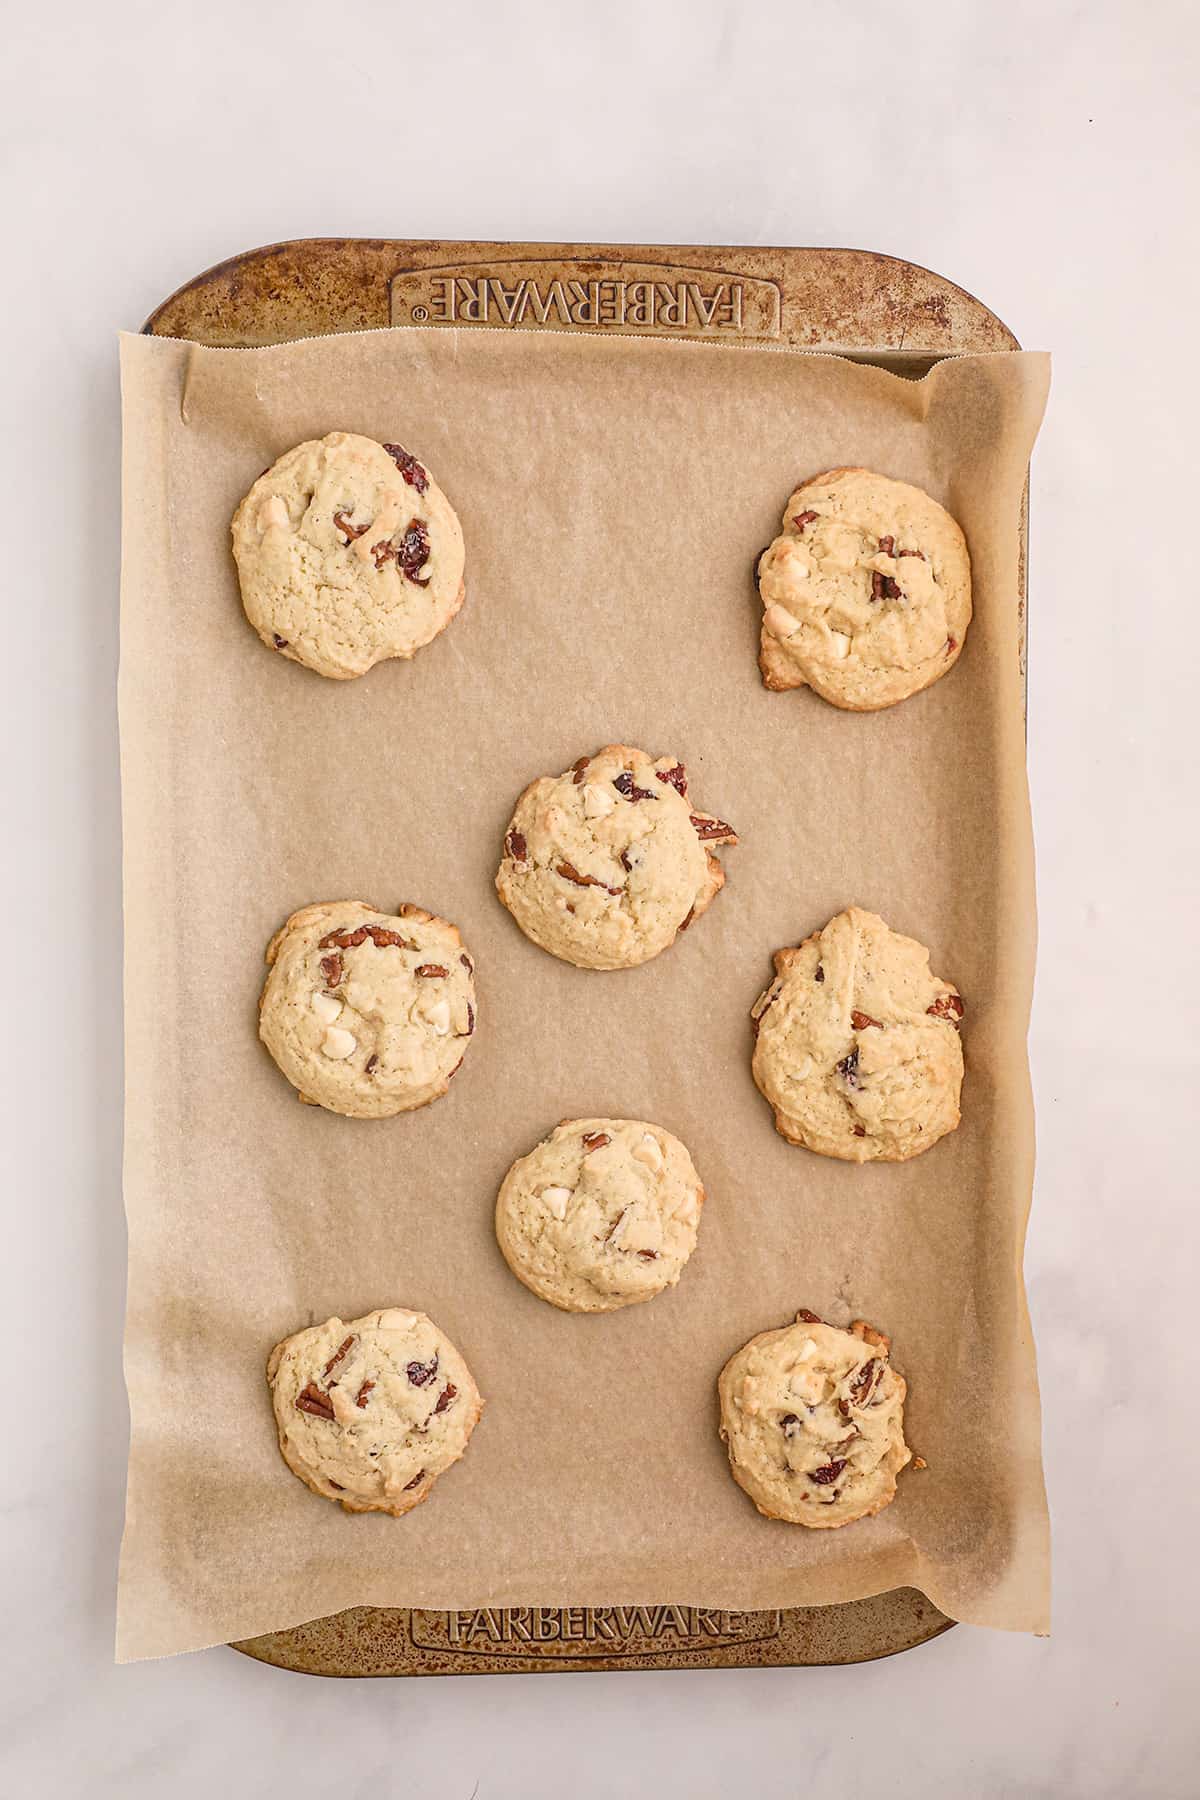 Baked cookies on a parchment lined baking sheet.